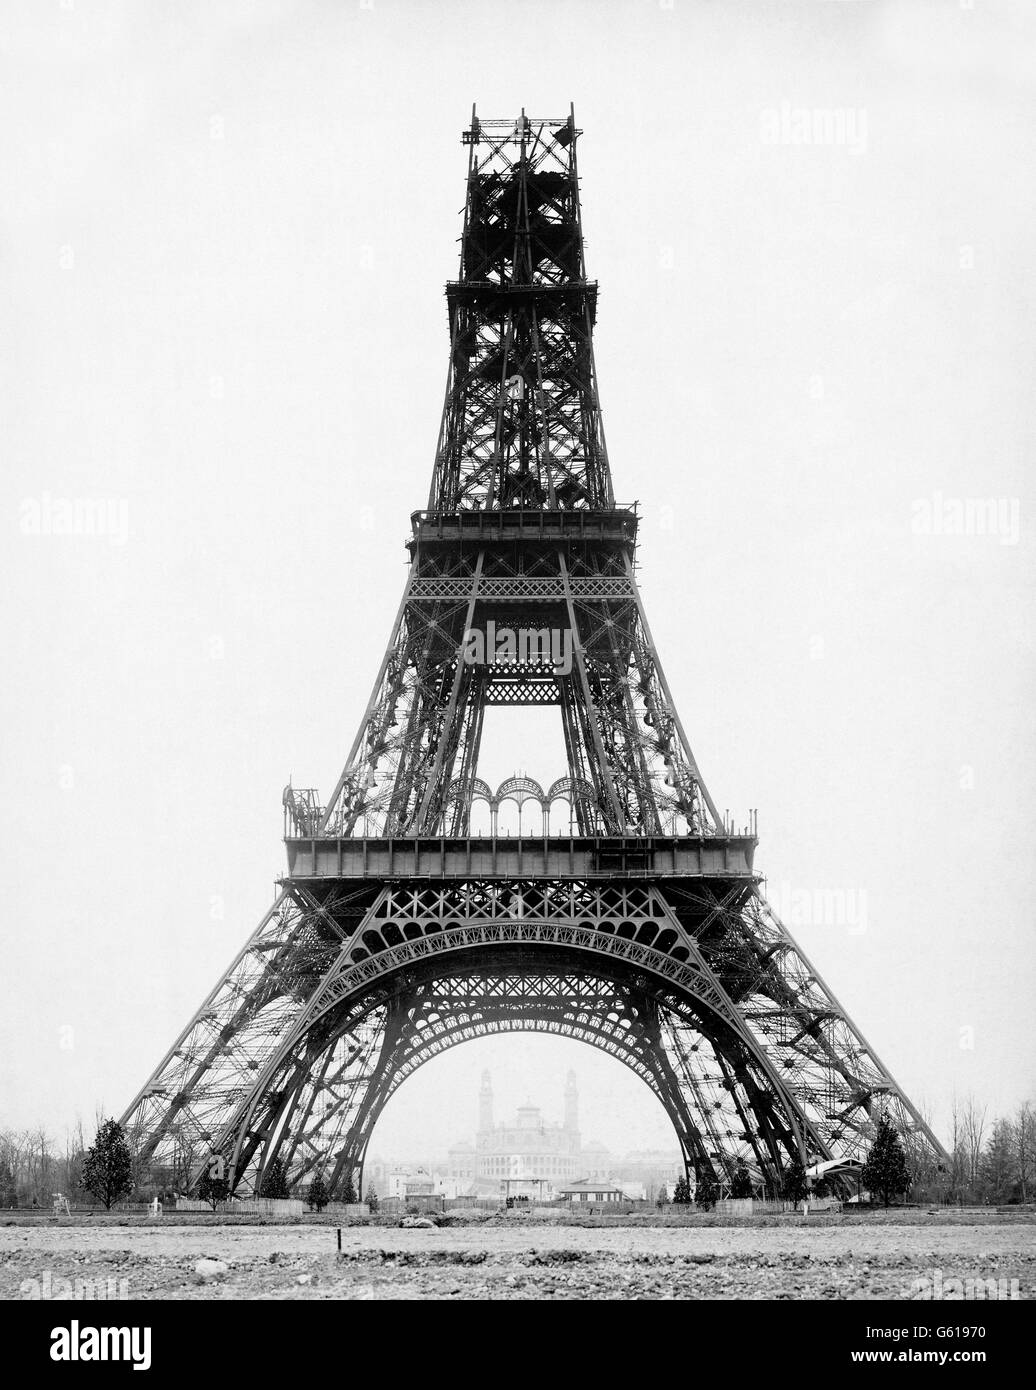 Eiffel Tower under construction, built to serve as the entrance to the Paris Exposition of 1889. This photograph, by Louis-Emile Durandelle, was taken in November 1888, about 4 months before completion. Stock Photo